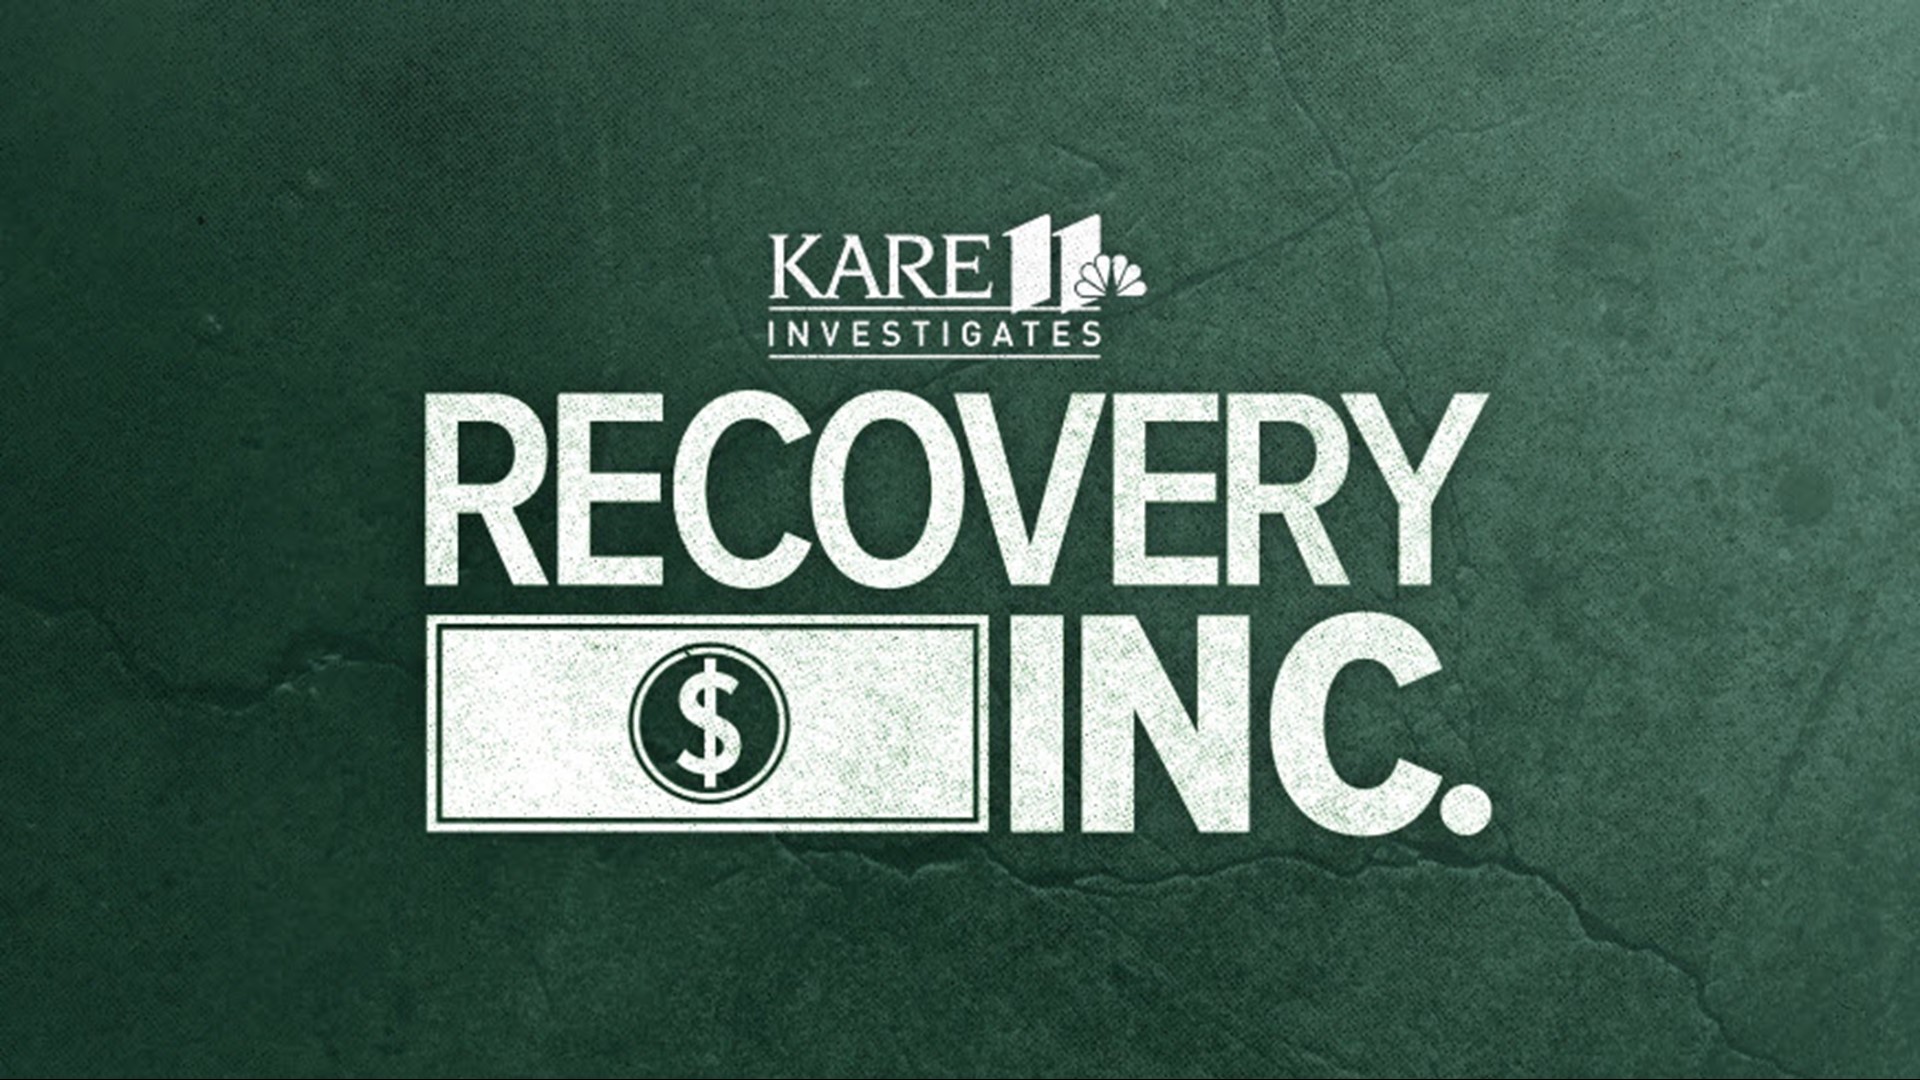 After KARE 11 Investigates found reports of alleged Medicaid billing irregularities, multiple sources confirm a federal probe of Kyros and Refocus Recovery.